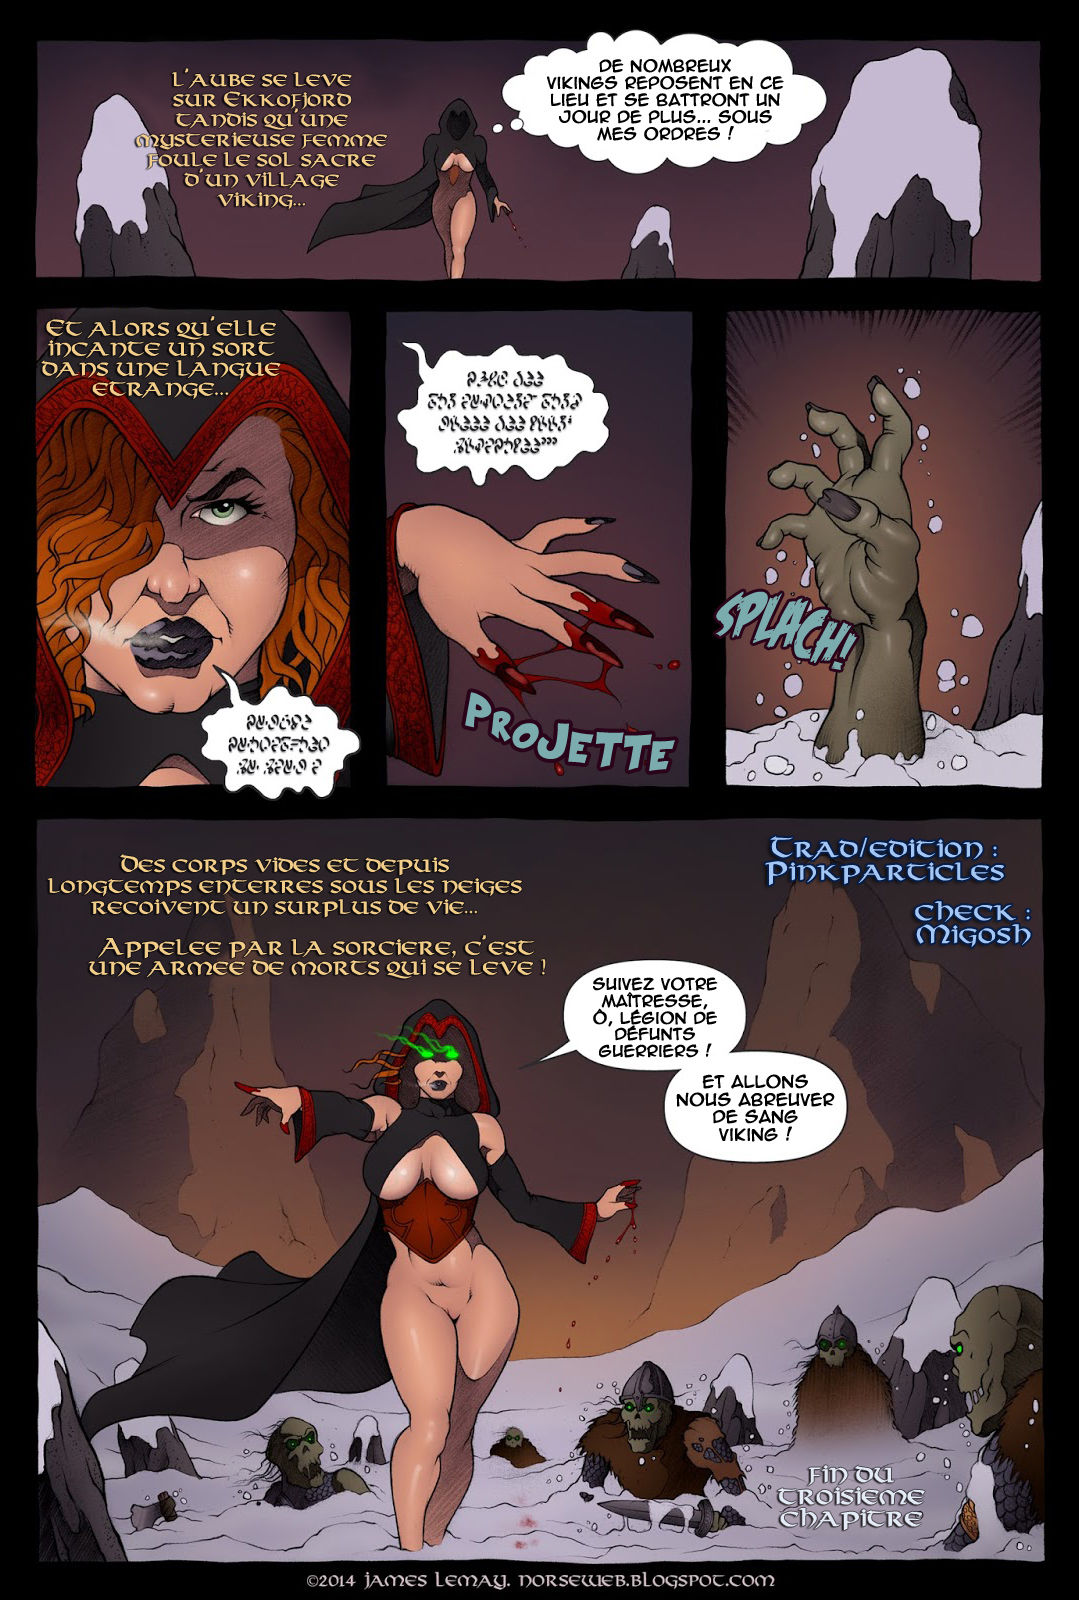 Norse : Dawn Of The Shield Maiden. Chap. 3. French. numero d'image 31